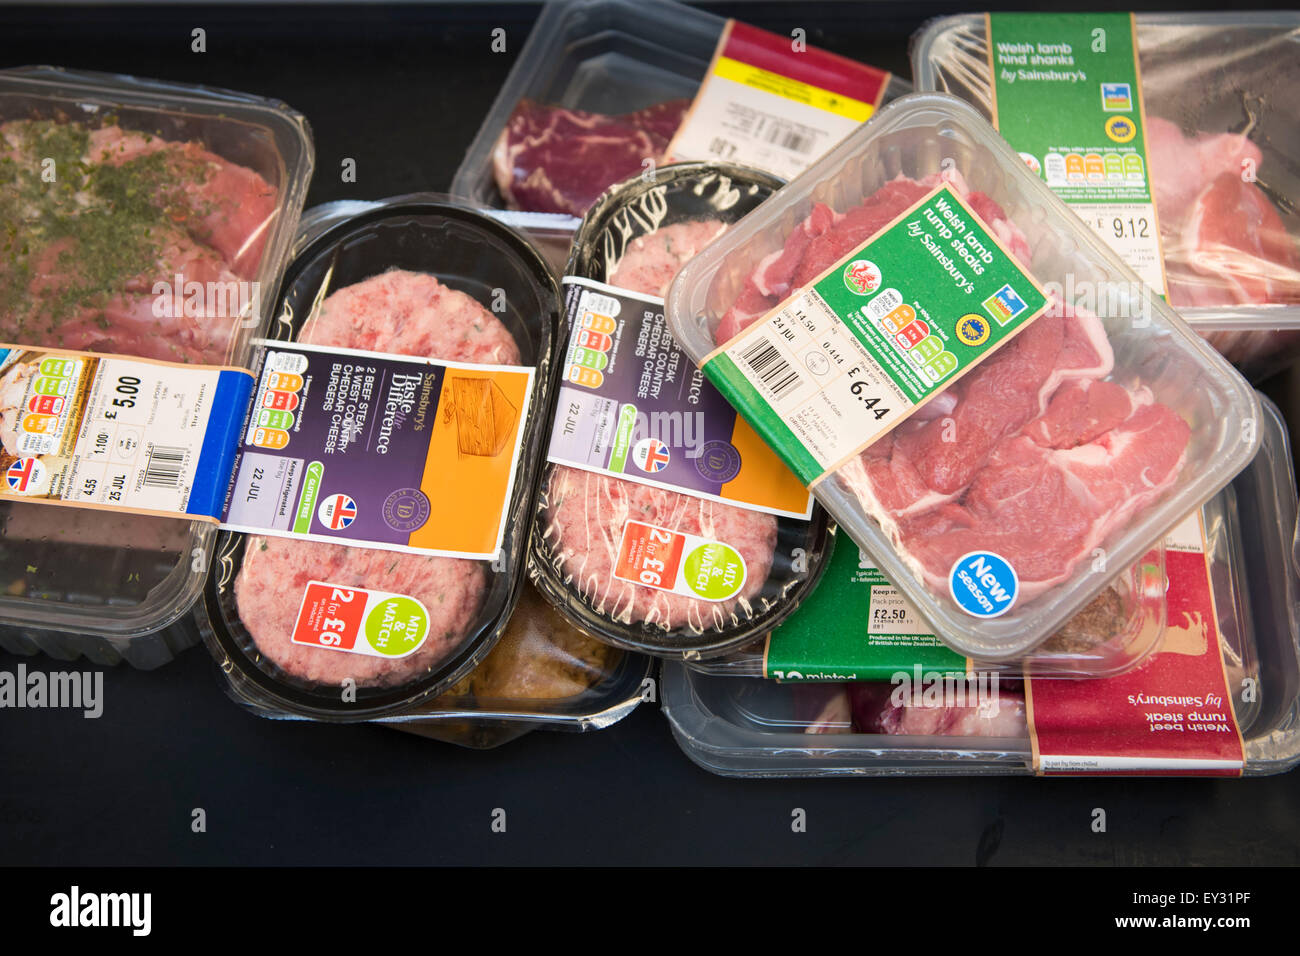 Red meat on sale at a supermarket checkout. Stock Photo